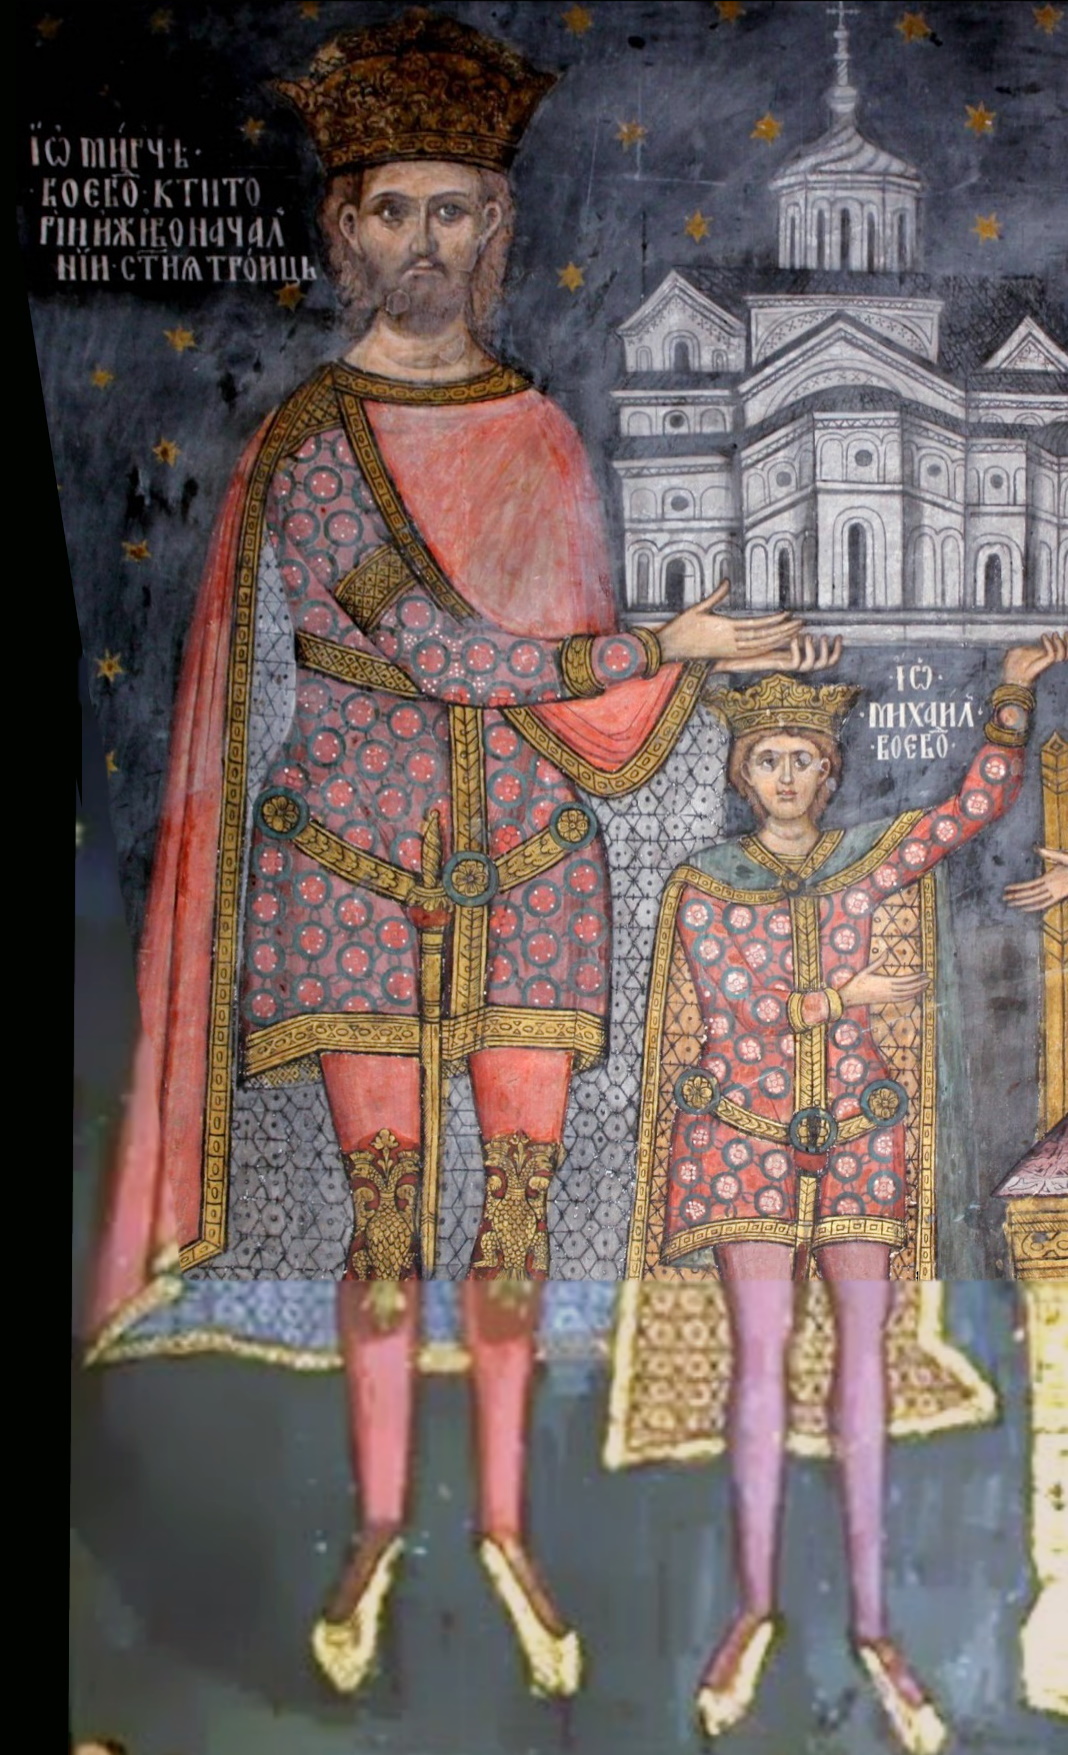 Maria's husband, Mircea I of Wallachia, and their son, Michael I of Wallachia, depicted on an 18th-century icon in the Cozia Monastery Mircea and Mihail.jpg